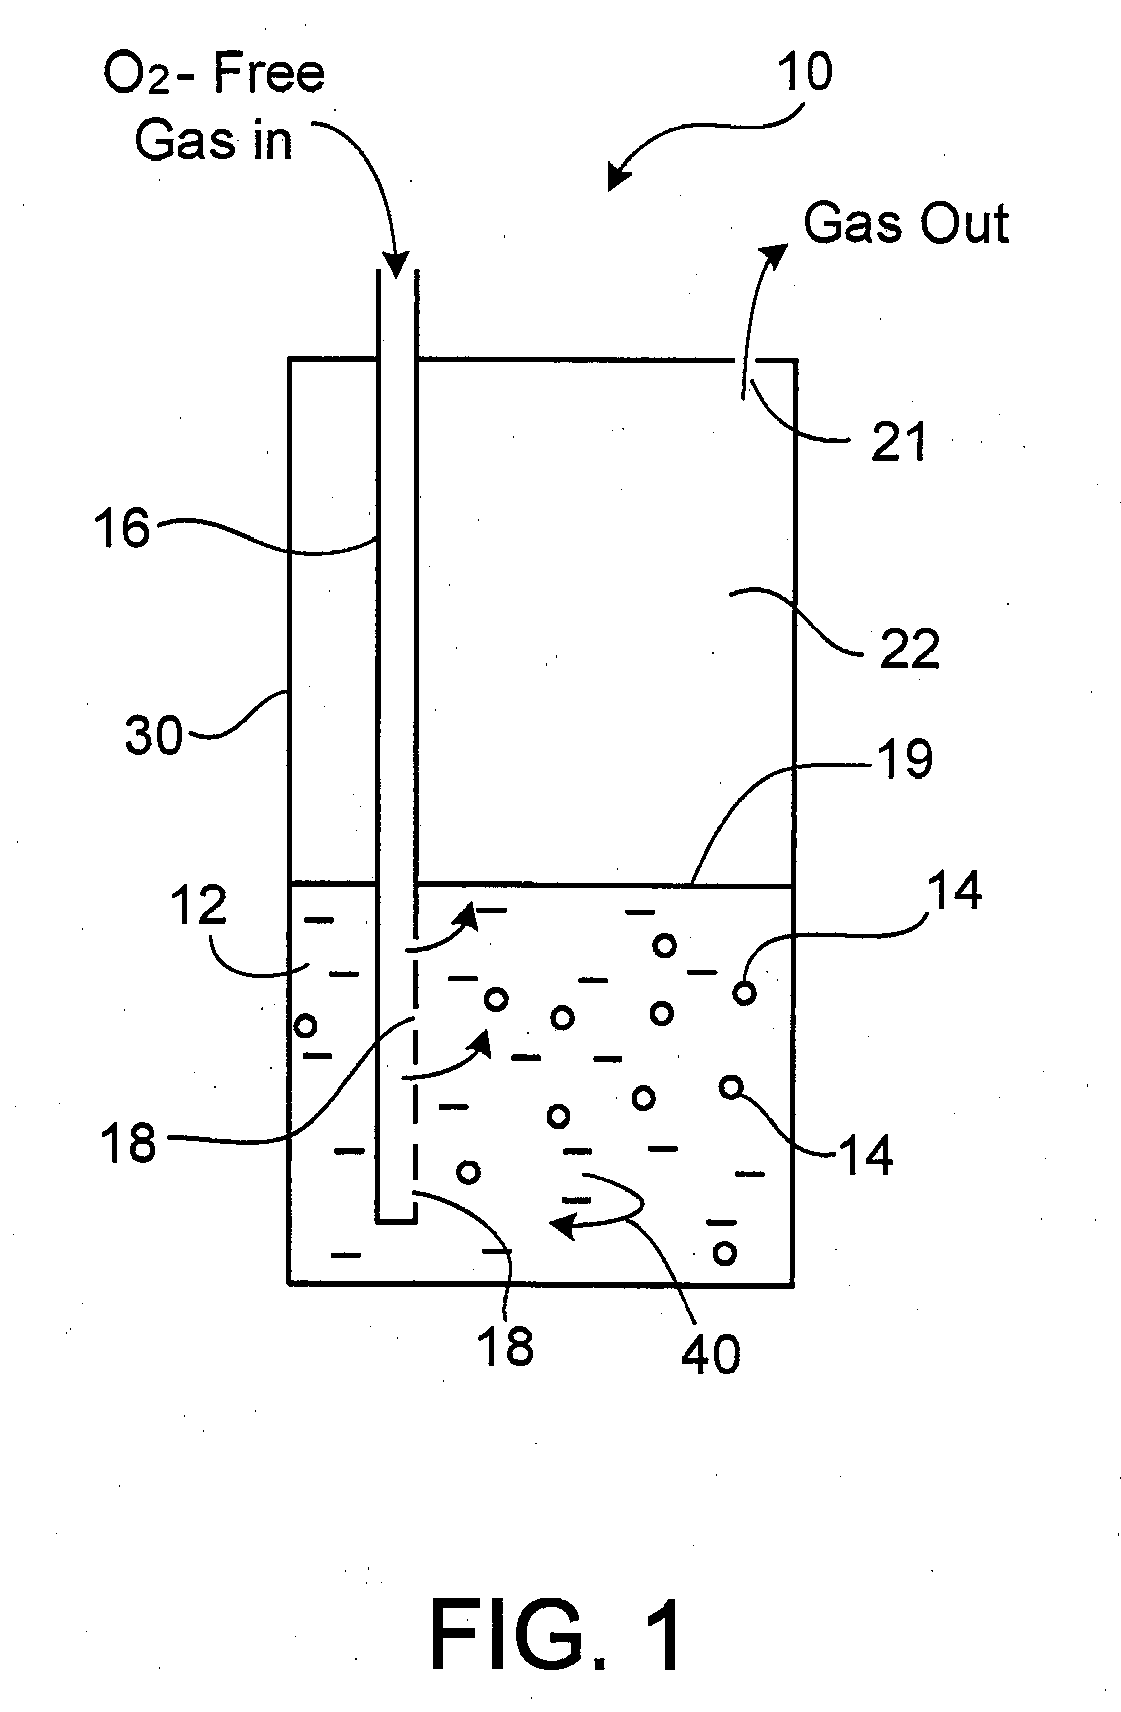 Systems and methods for producing biofuels and related materials